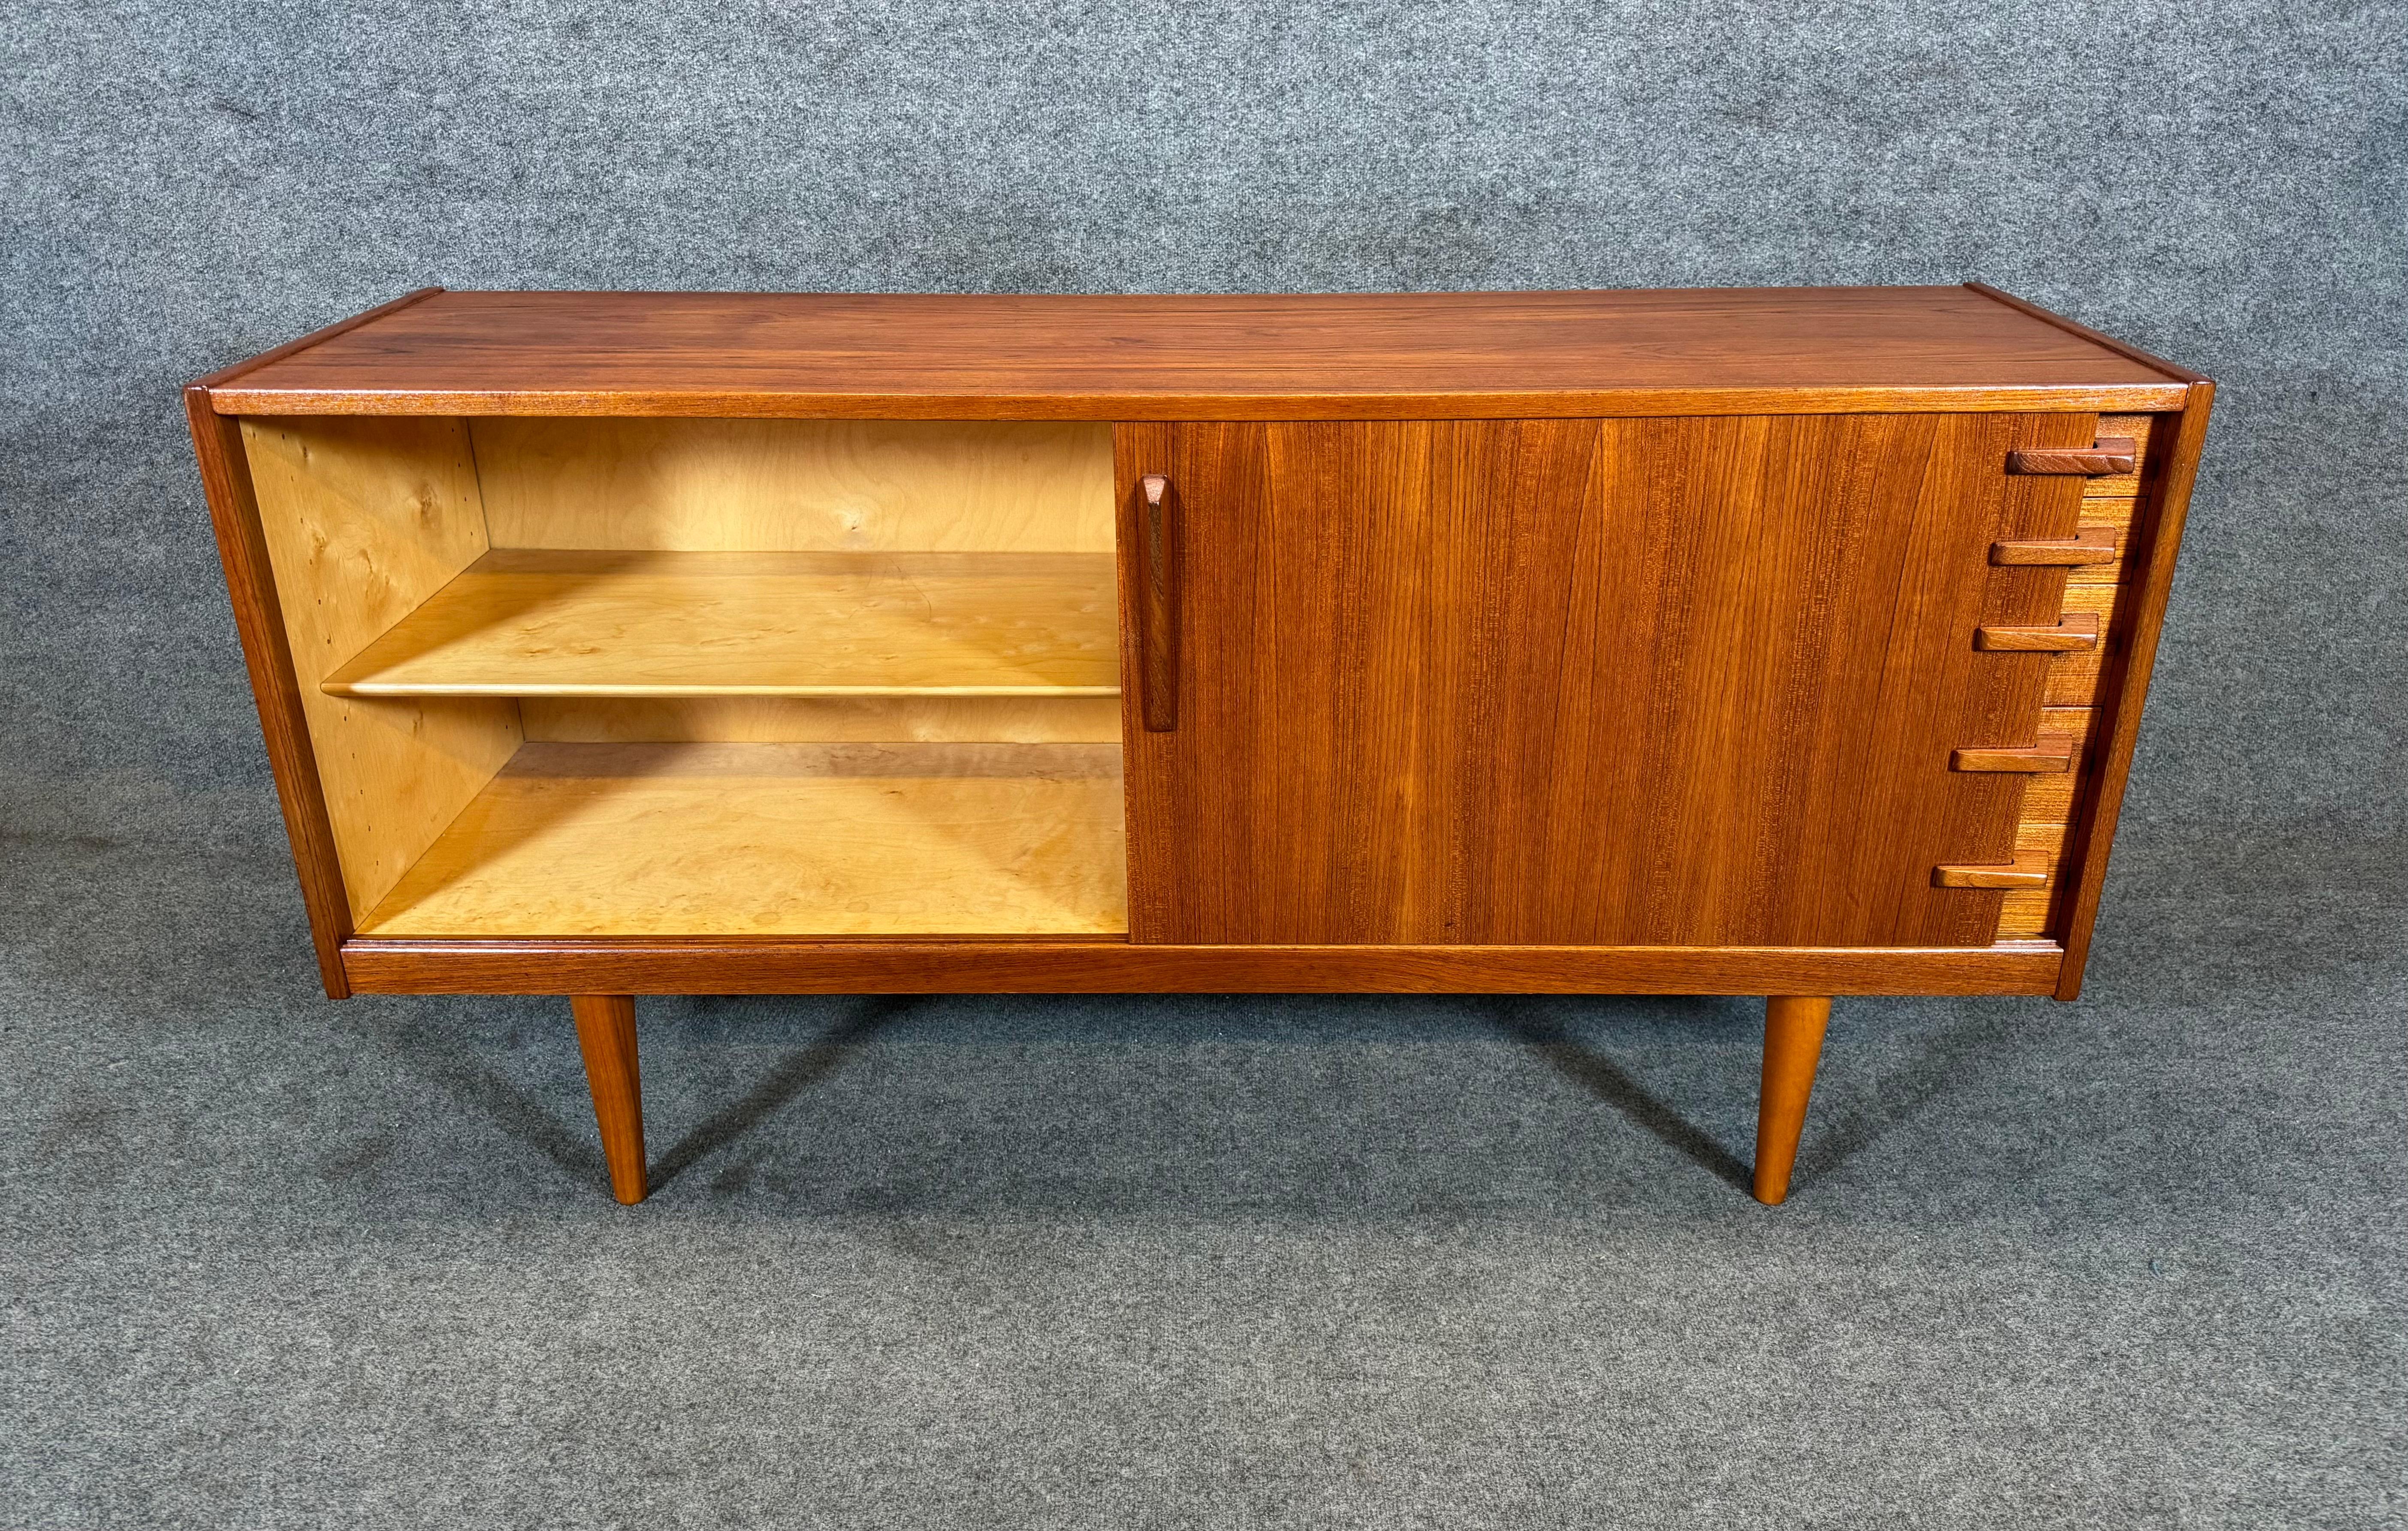 Here is a beautiful scandinavian modern compact sideboard in teak designed by Yngve Ekström and manufactured by Hugo Troeds in Sweden in the 1960's.
This lovely case piece, recently imported from Europe to California before its refinishing, features